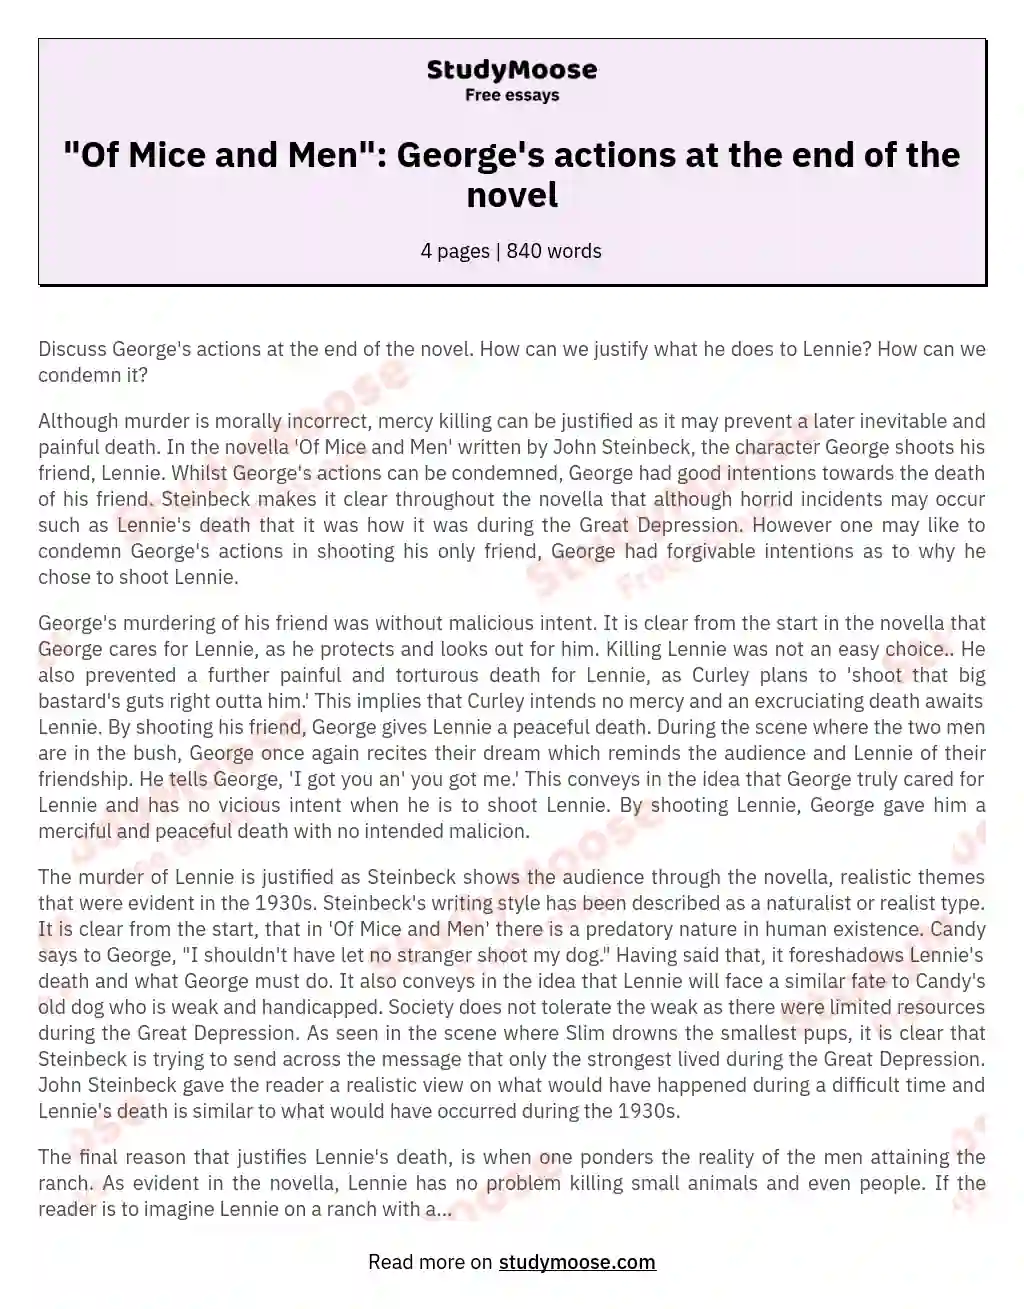 "Of Mice and Men": George's actions at the end of the novel essay